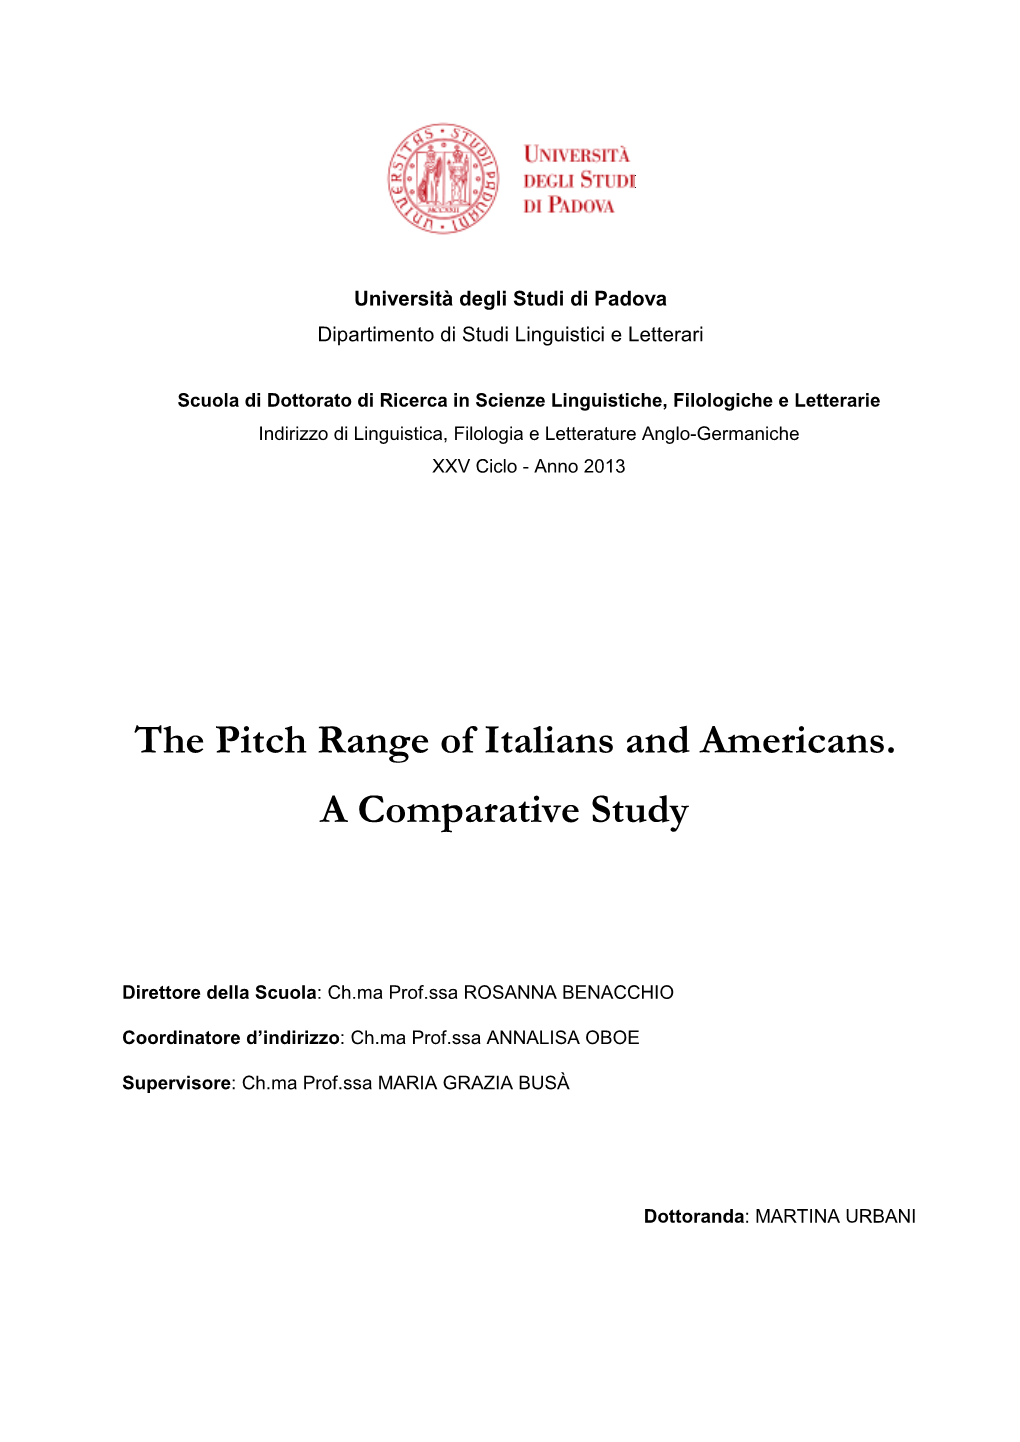 The Pitch Range of Italians and Americans. a Comparative Study